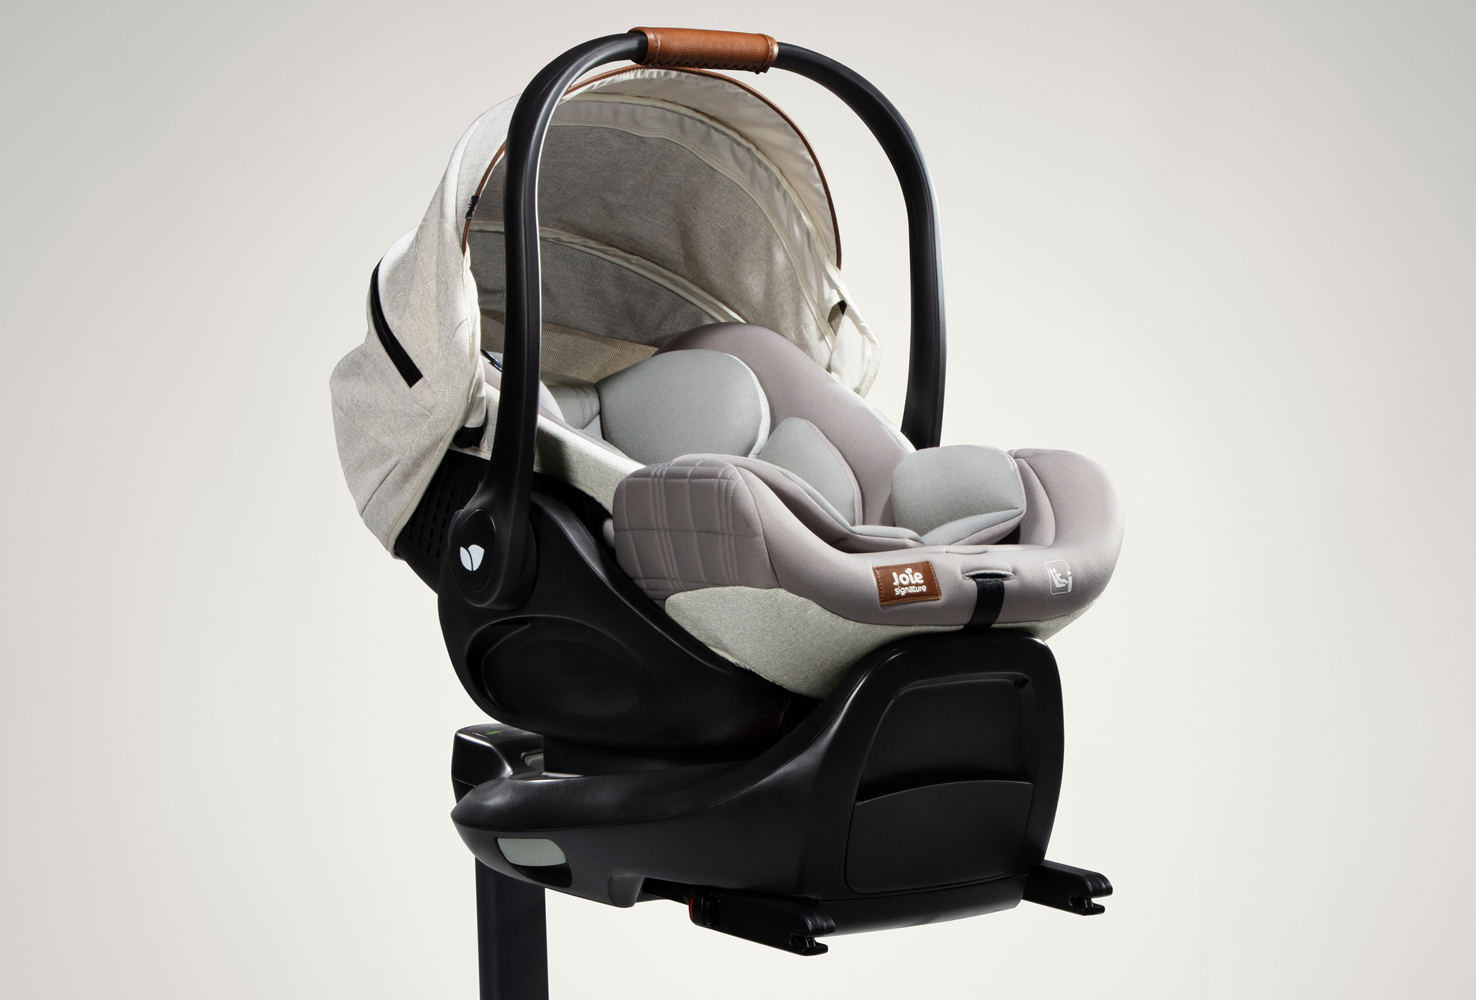 Gray Joie Signature I-Level Recline infant car seat attached to an ISOFIX base, facing toward the right at an angle.